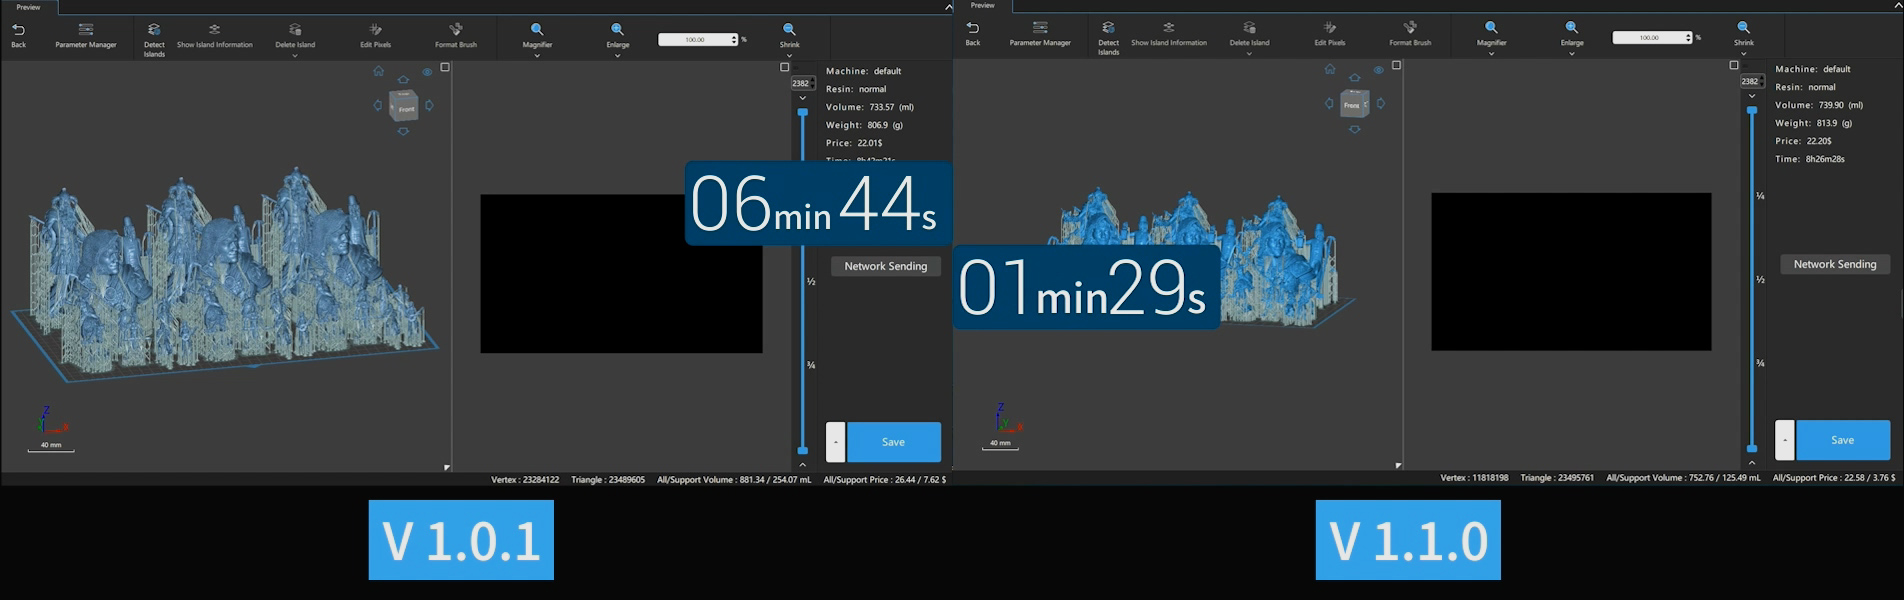 CHITUBOX Pro V1.1.0 offers significantly faster slicing, saving, and island detection speeds. Image via CBD-Tech.